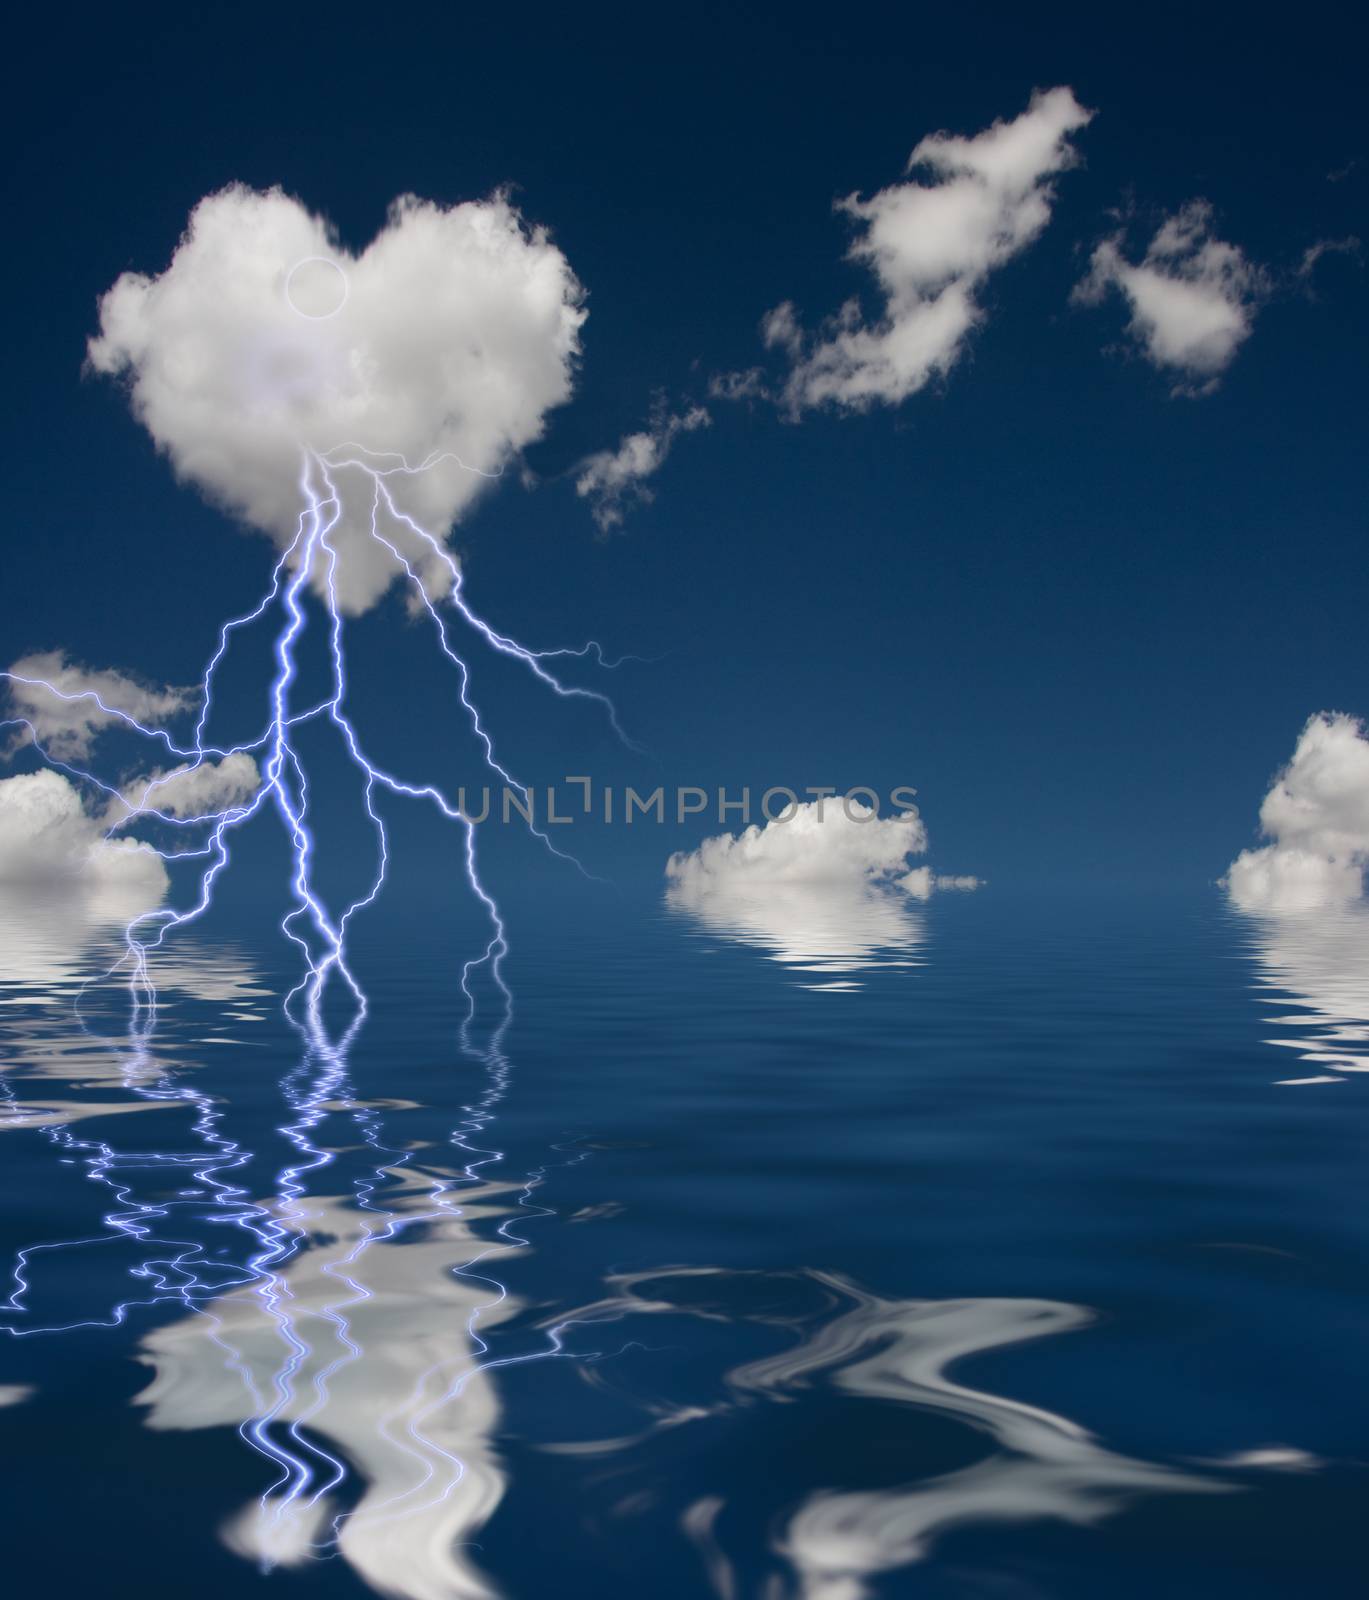 Heart Shaped Cloud With Thunderbolt by applesstock